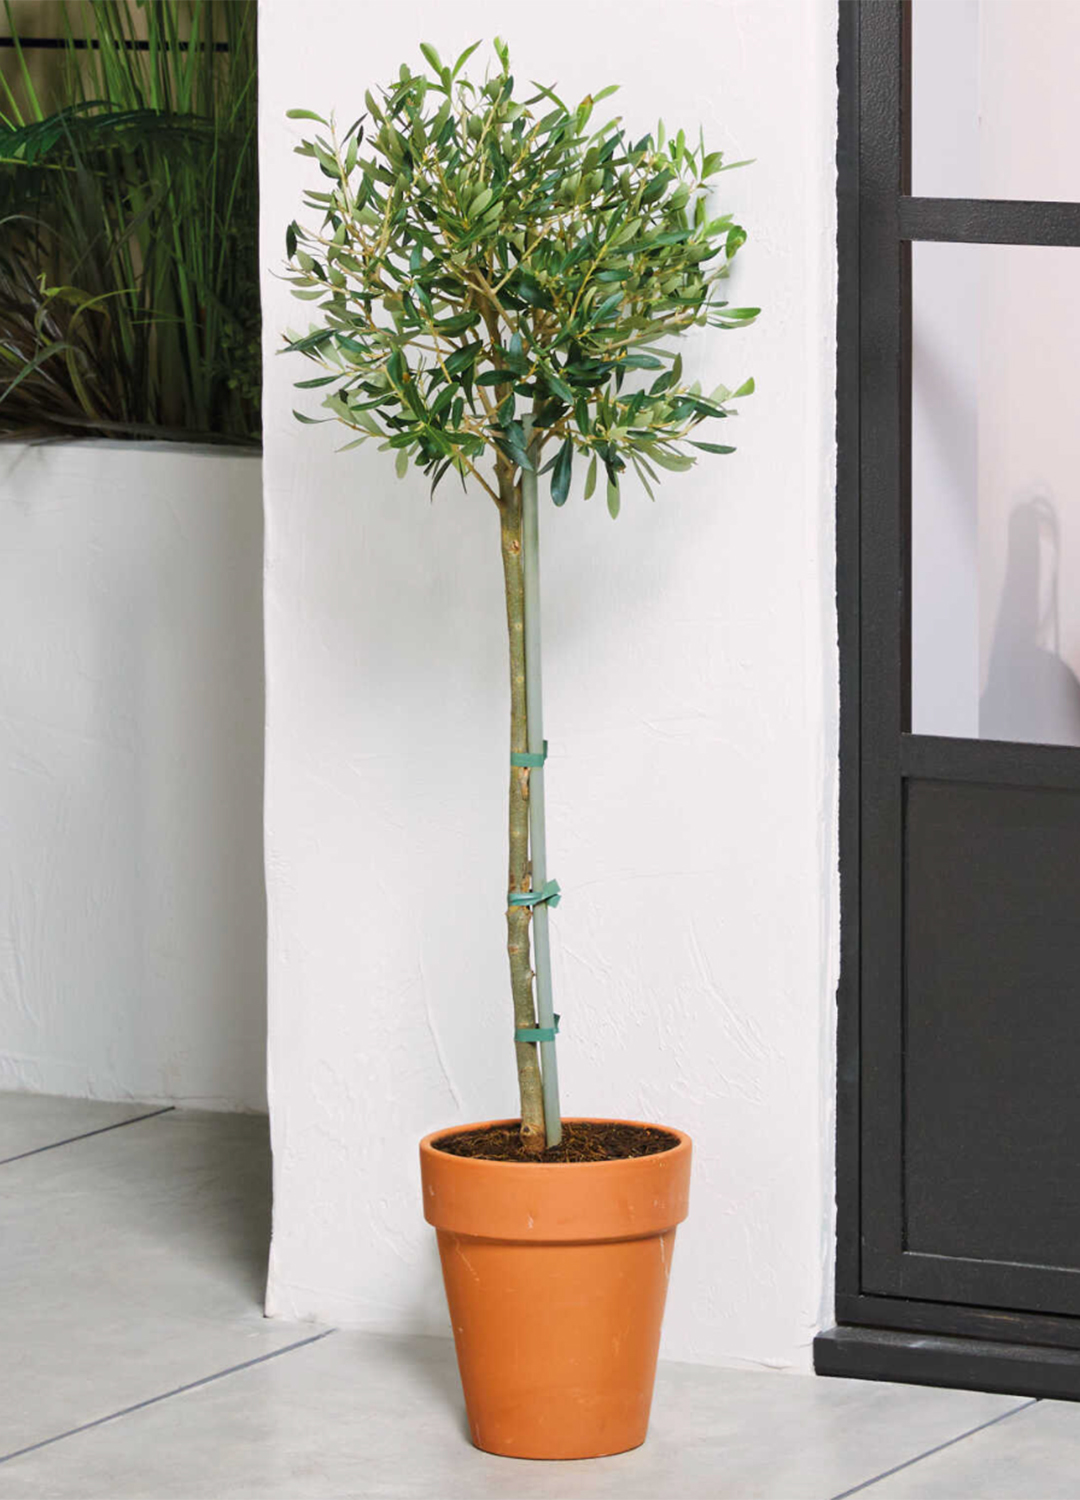 Potted olive tree against a white clapperboard house exterior